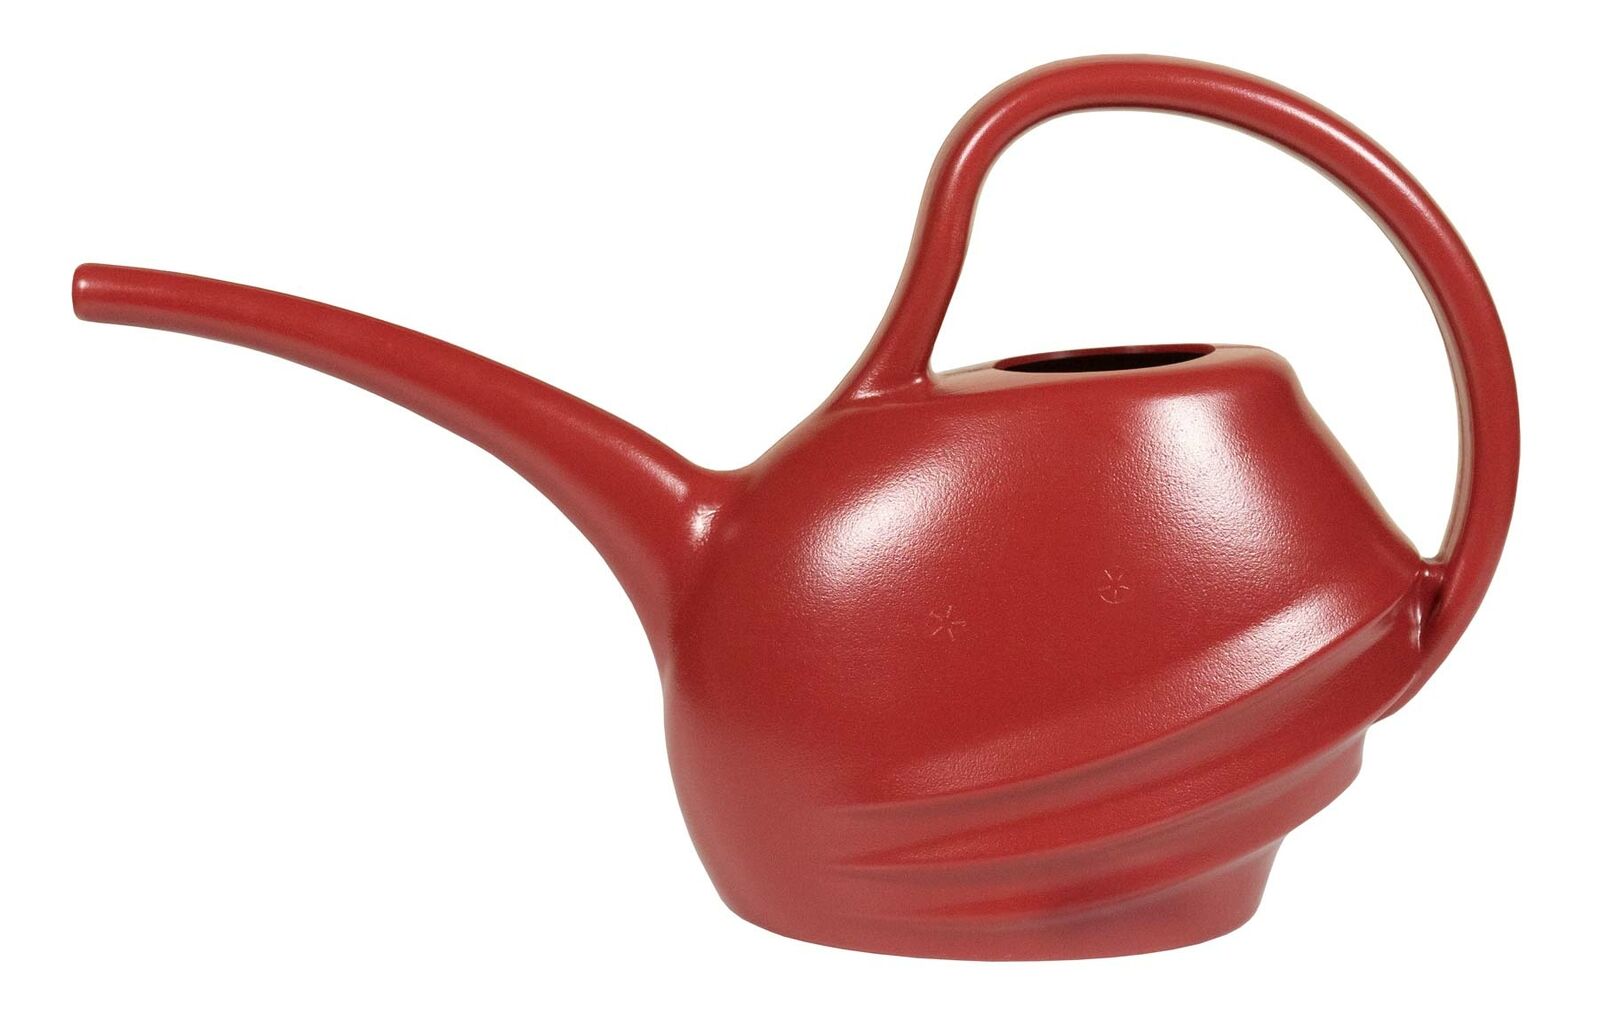 Bloem Lightweight Plastic Watering Can w/ Long Spout, 1.5 L (Red)